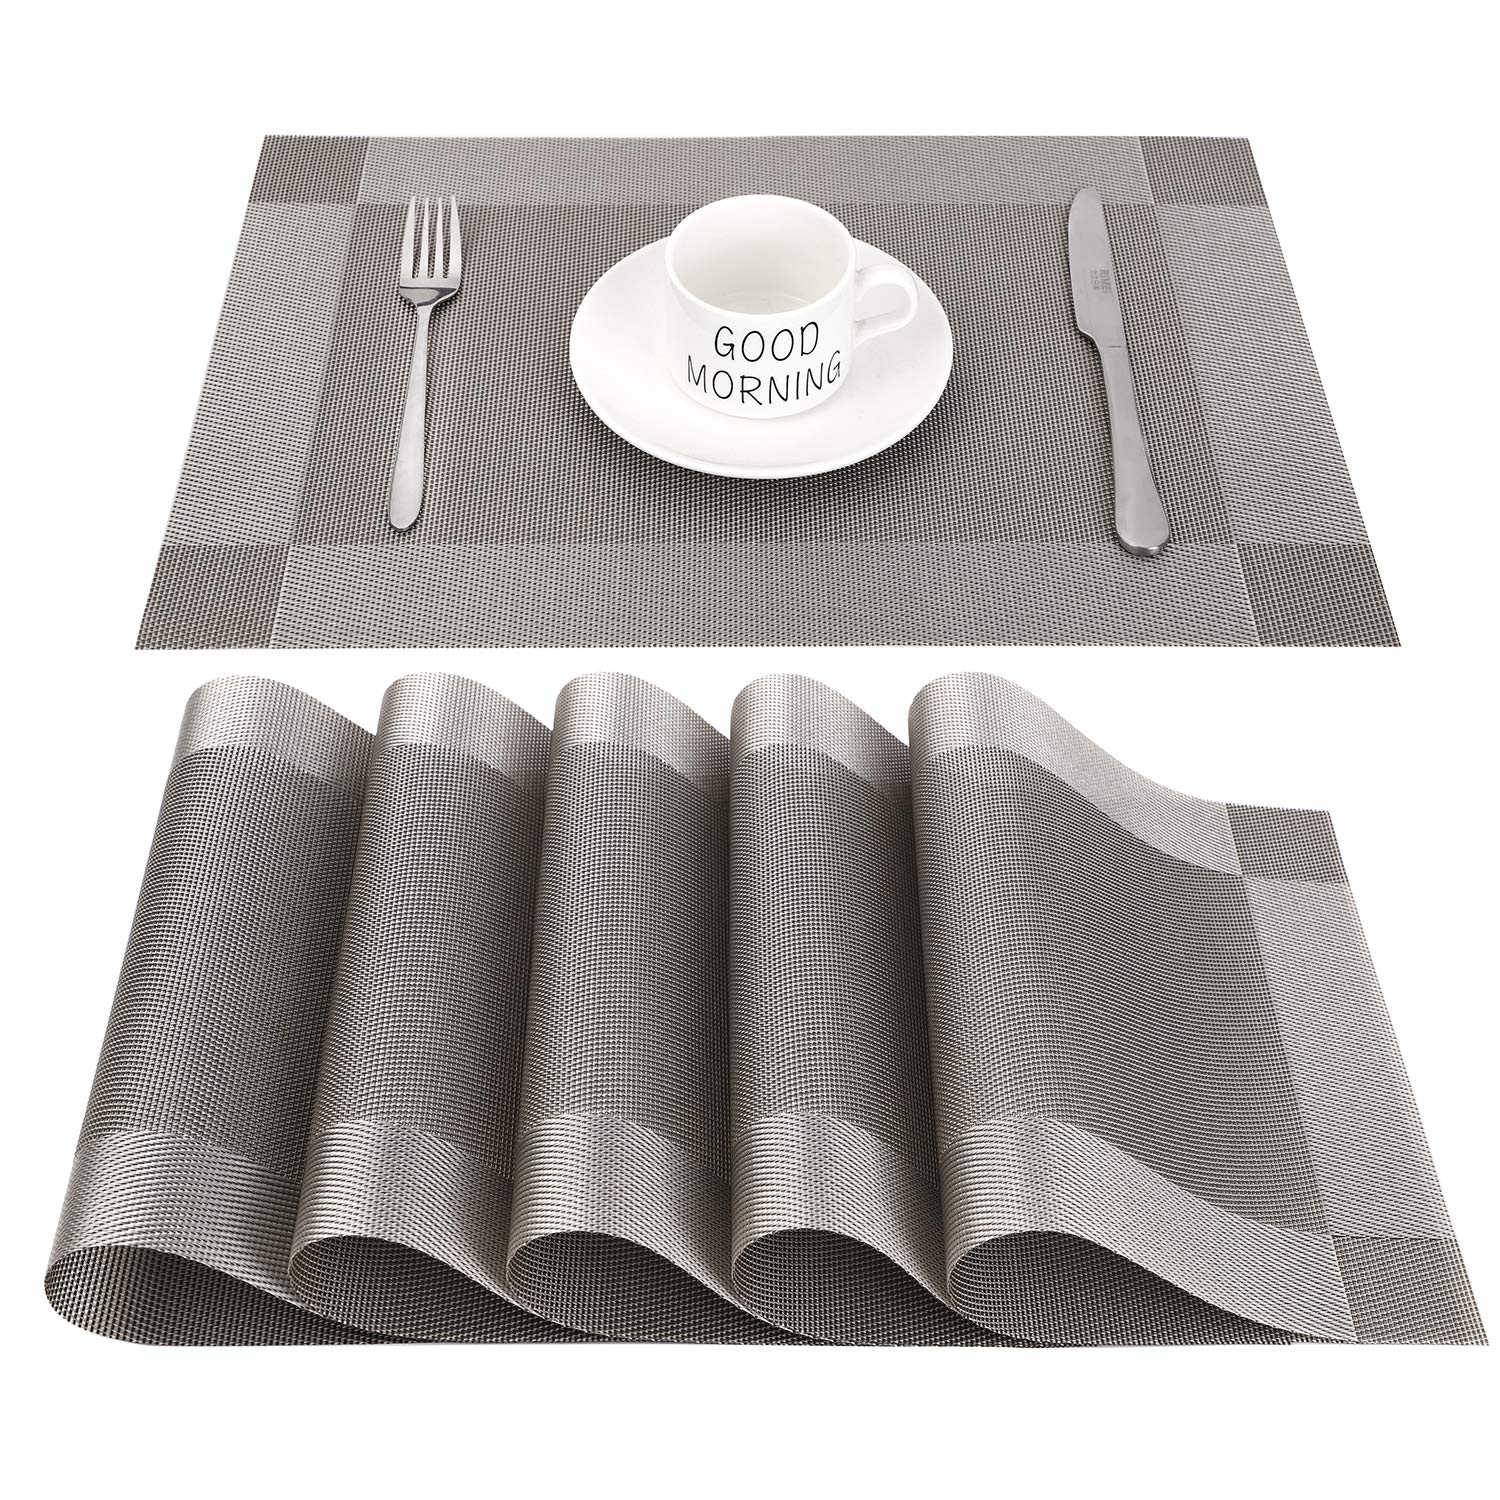 CHAOCHI Placemats set of 6,Easy to Clean Non-slip Heat Resistant Dining Table Mats,Washable Crossweave Woven Vinyl PVC Place mats,45CM x 30CM (Grey+Silver)